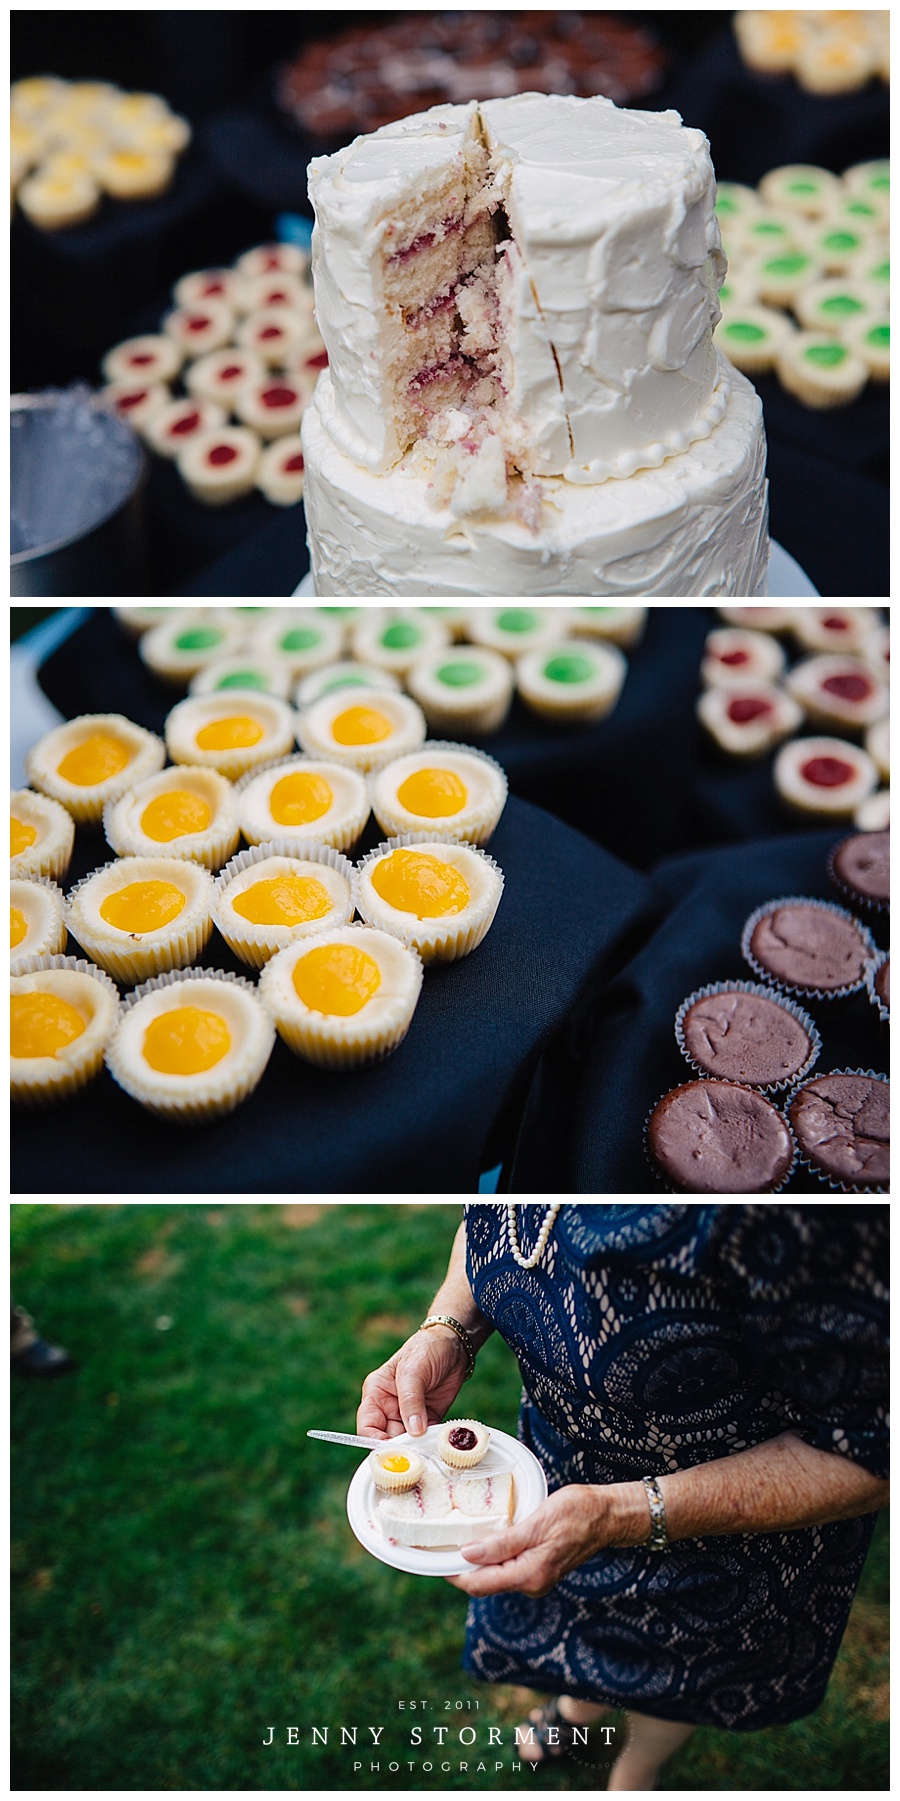 albees-garden-party-wedding-photos-by-jenny-storment-photography-86